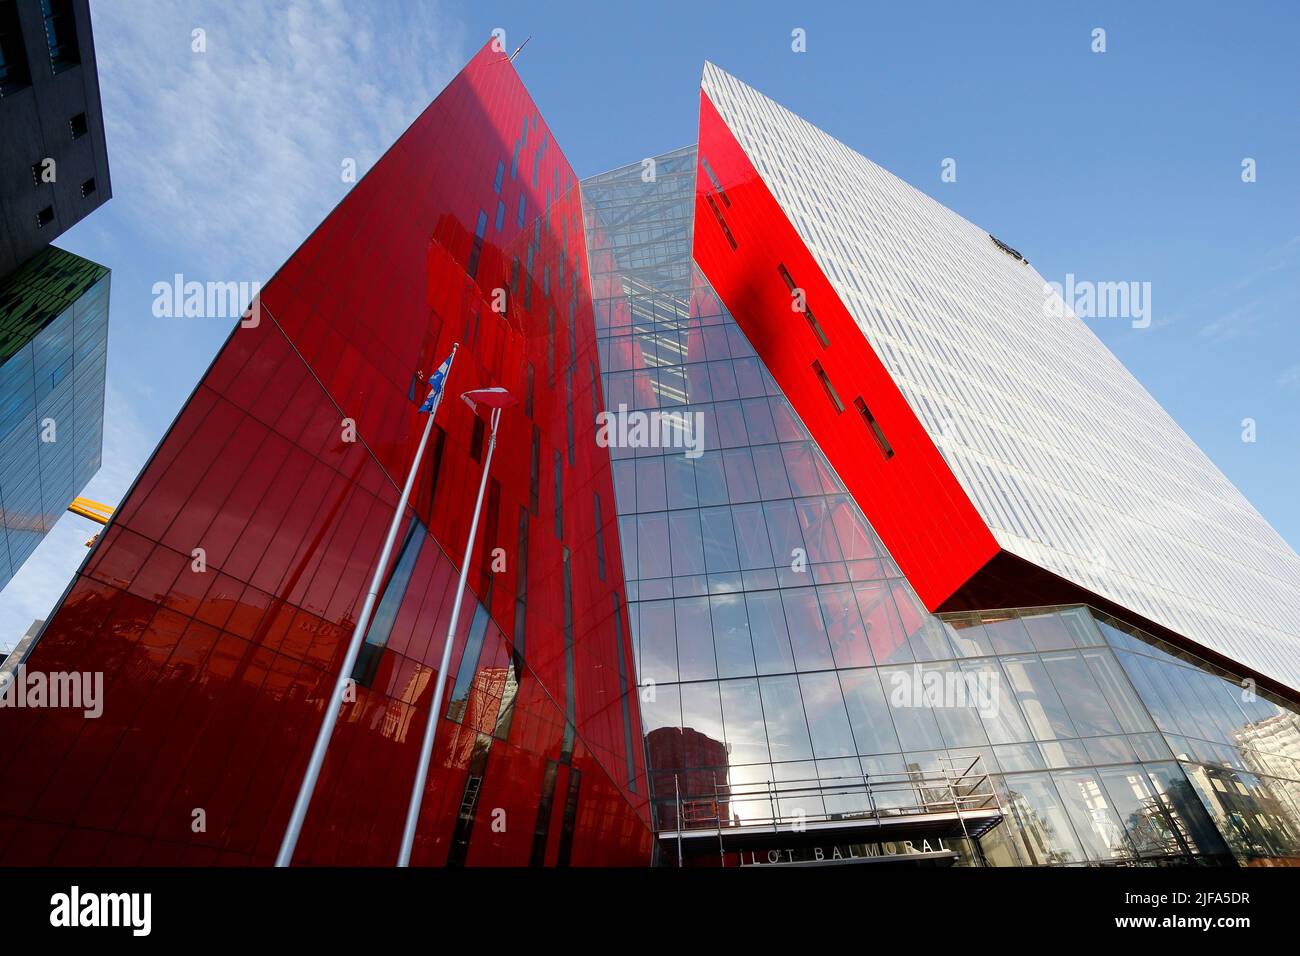 Architecture, modern building, Montreal, Province of Quebec, Canada Stock Photo